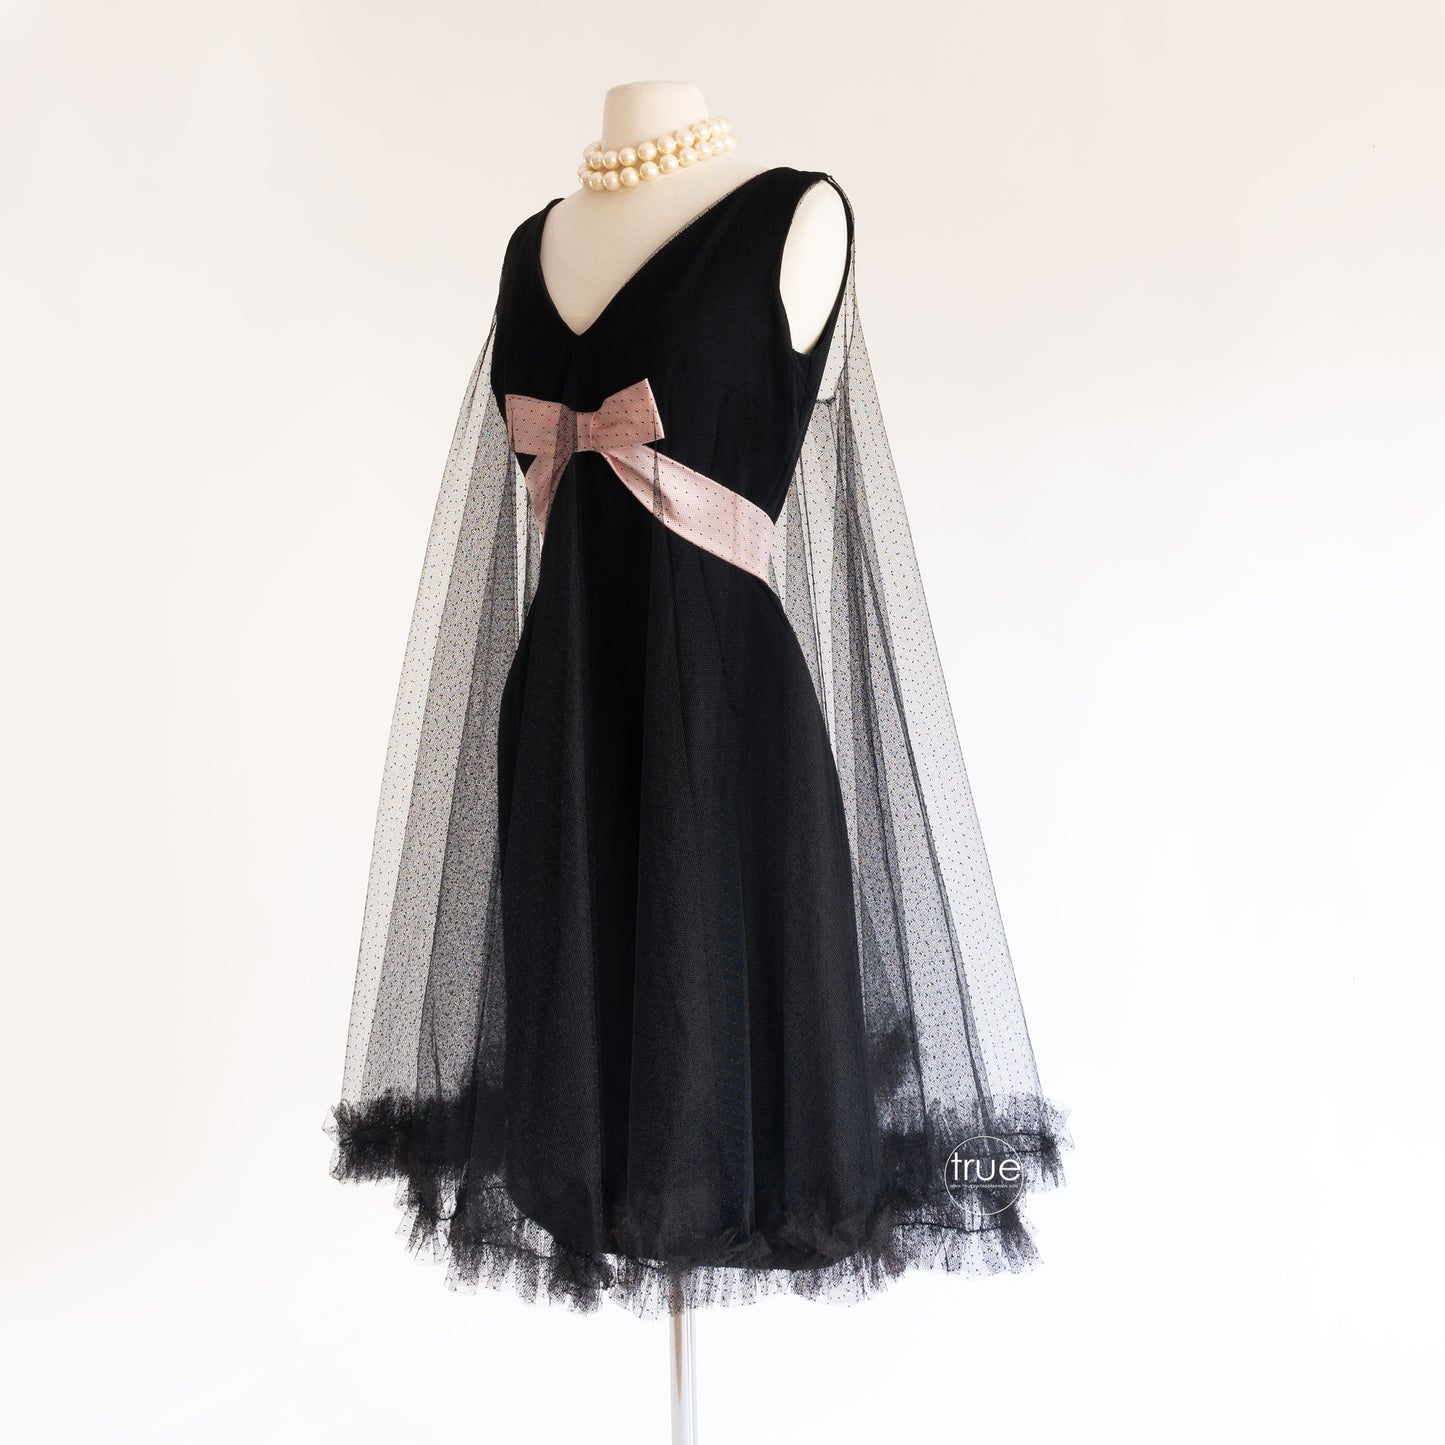 vintage 1950's dress ...so very midge black wiggle dress with tulle trapeze overlay